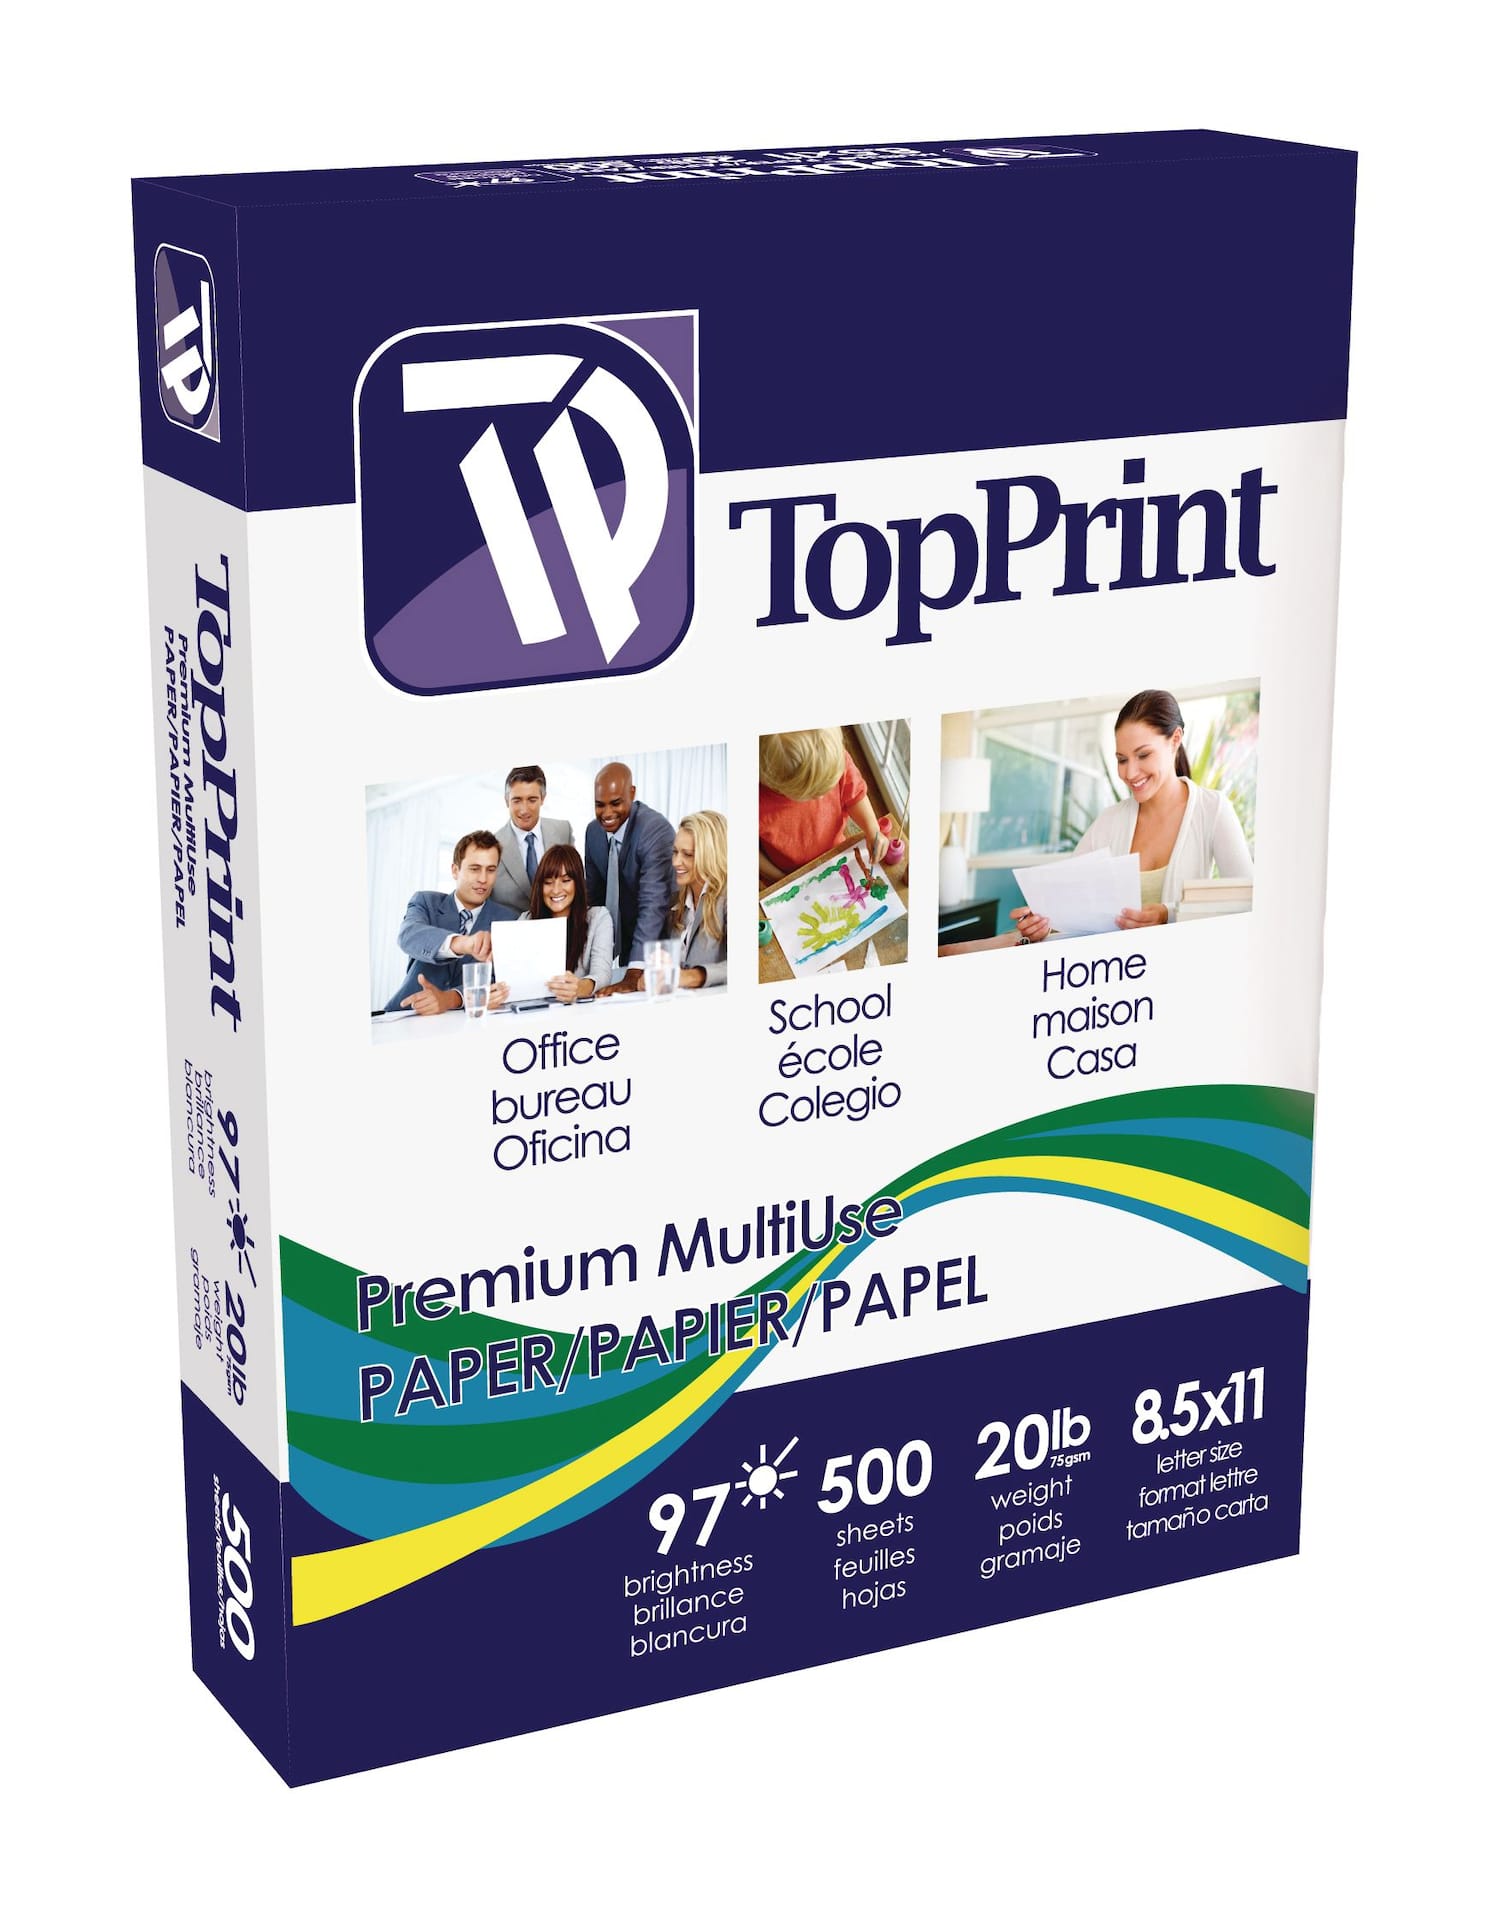 Hammermill Multi-Purpose Outlet Copy Paper, 8 1/2'' x 11'', 92